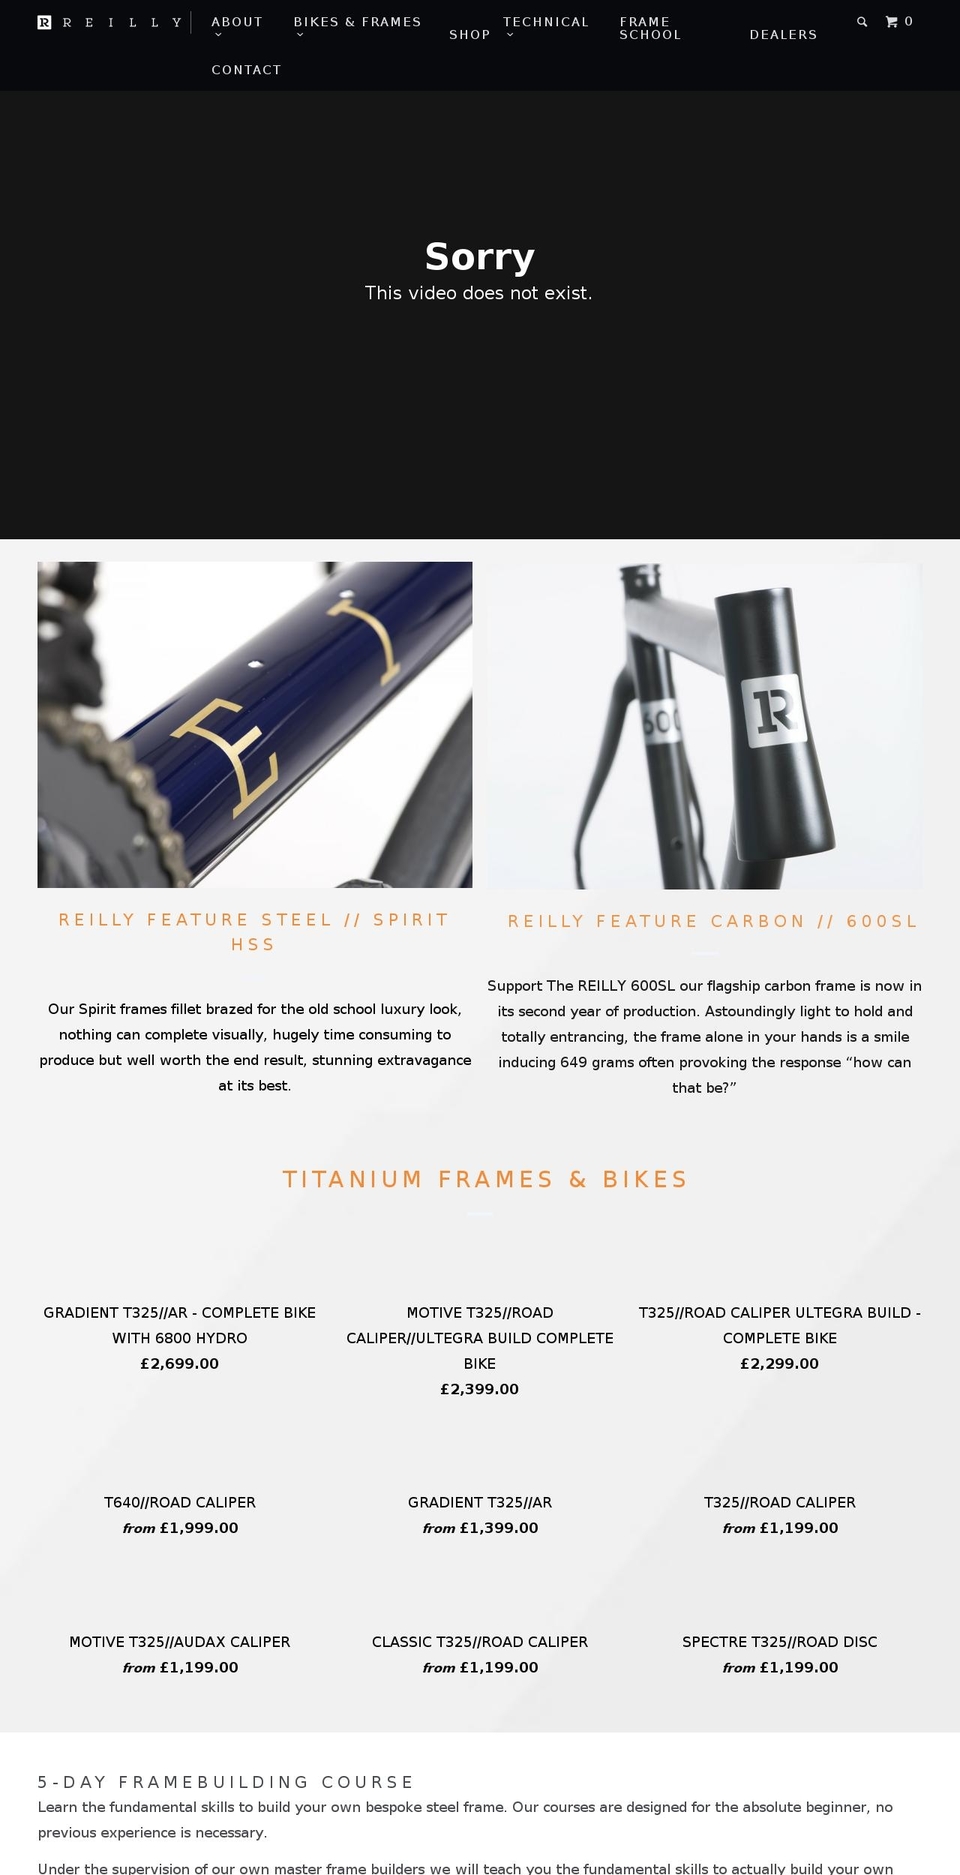 Athens Shopify theme site example reillycycleworks.com